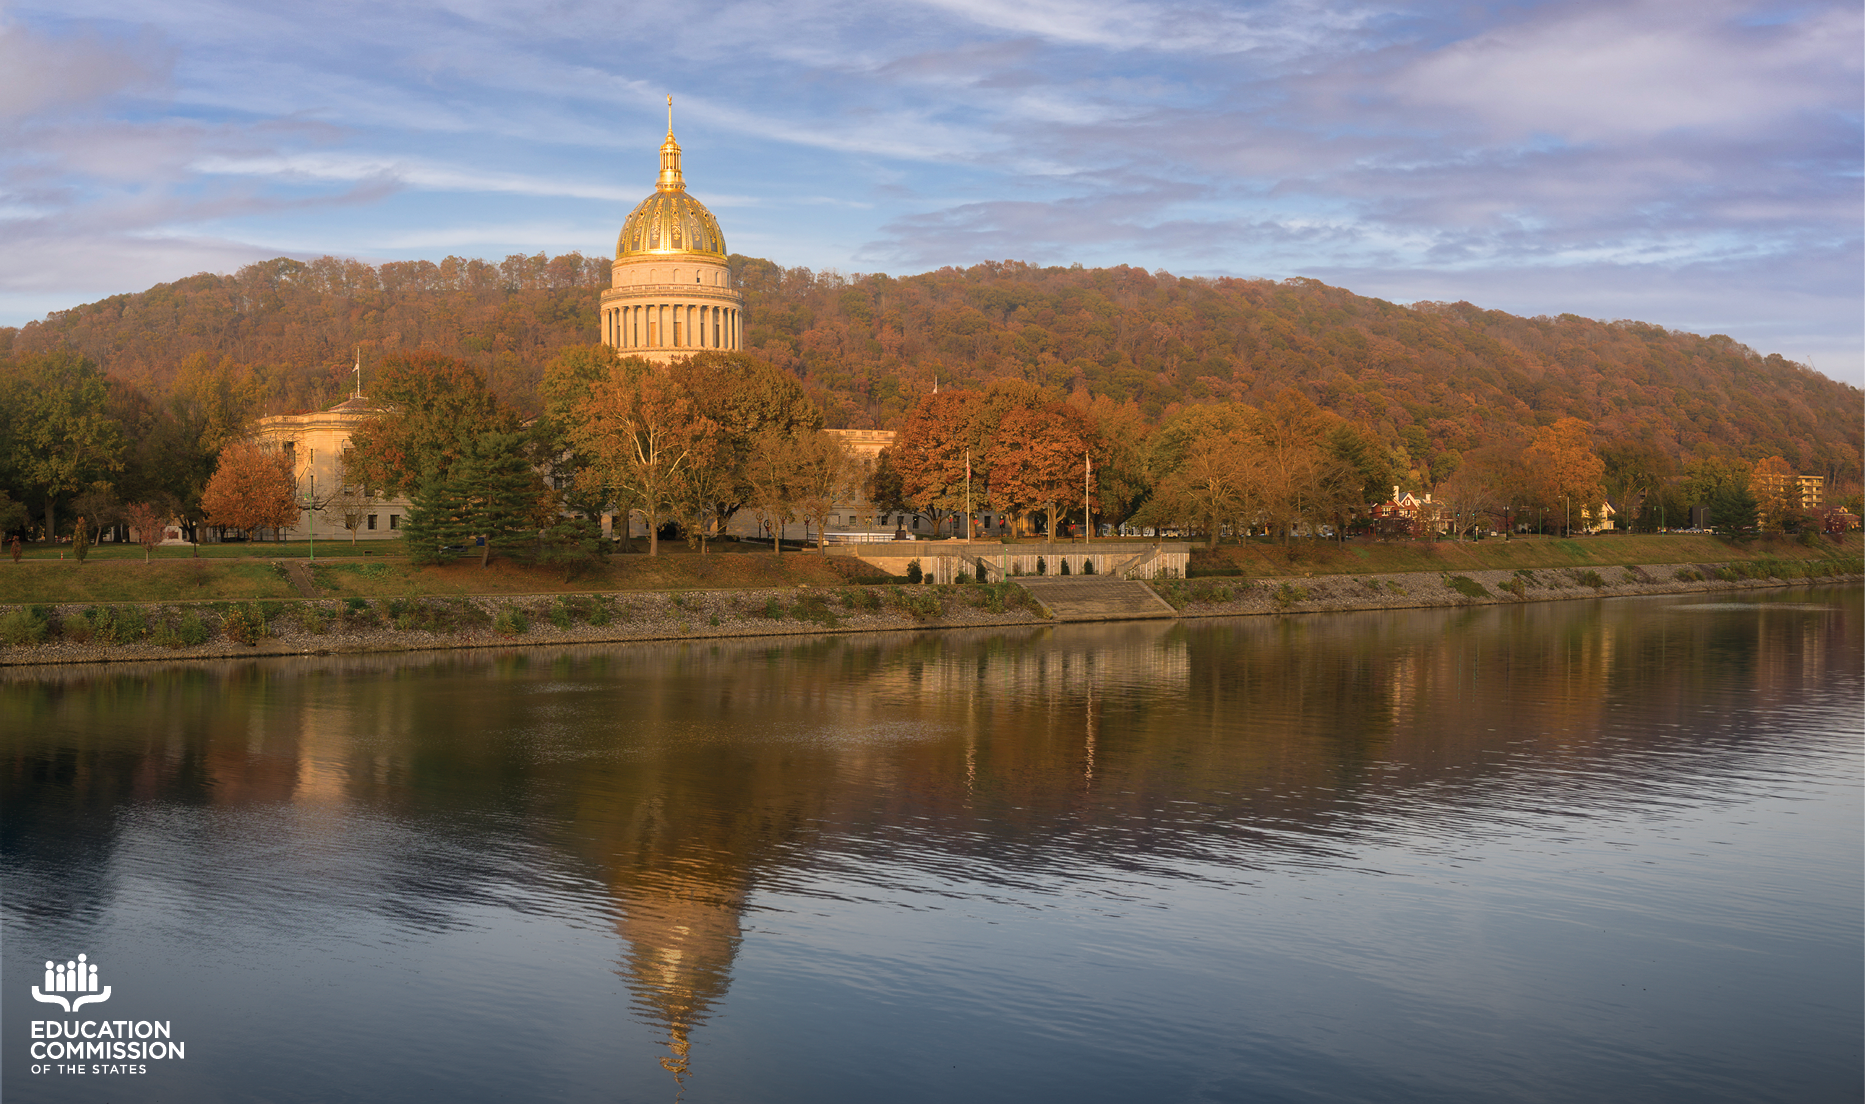 The West Virginia state capitol building around sunset. The capitol's reflection is captured in the Kanawha River below.